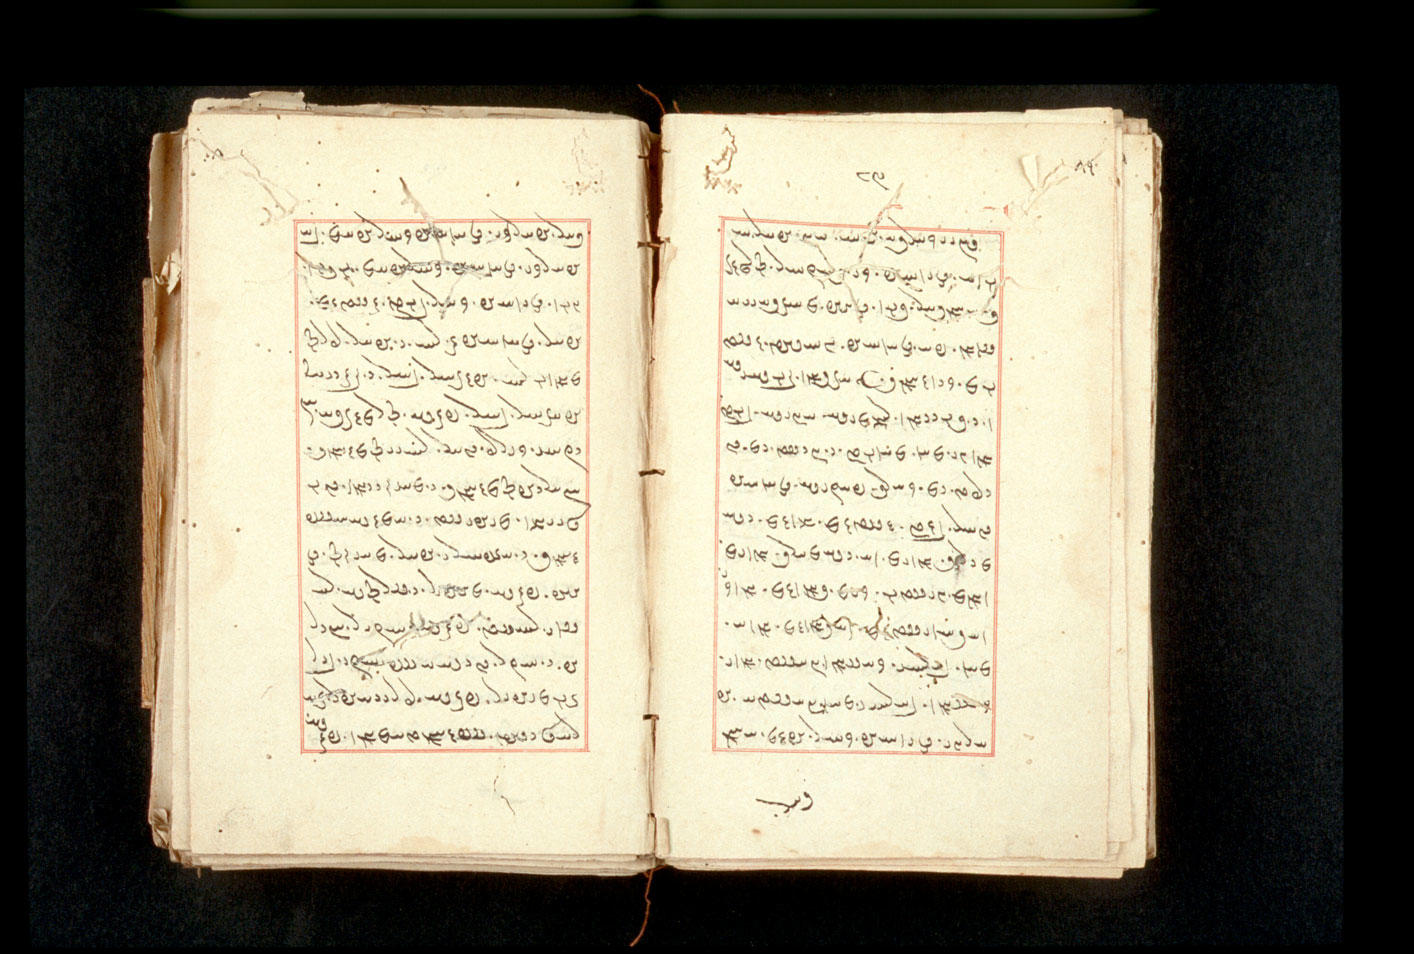 Folios 89v (right) and 90r (left)